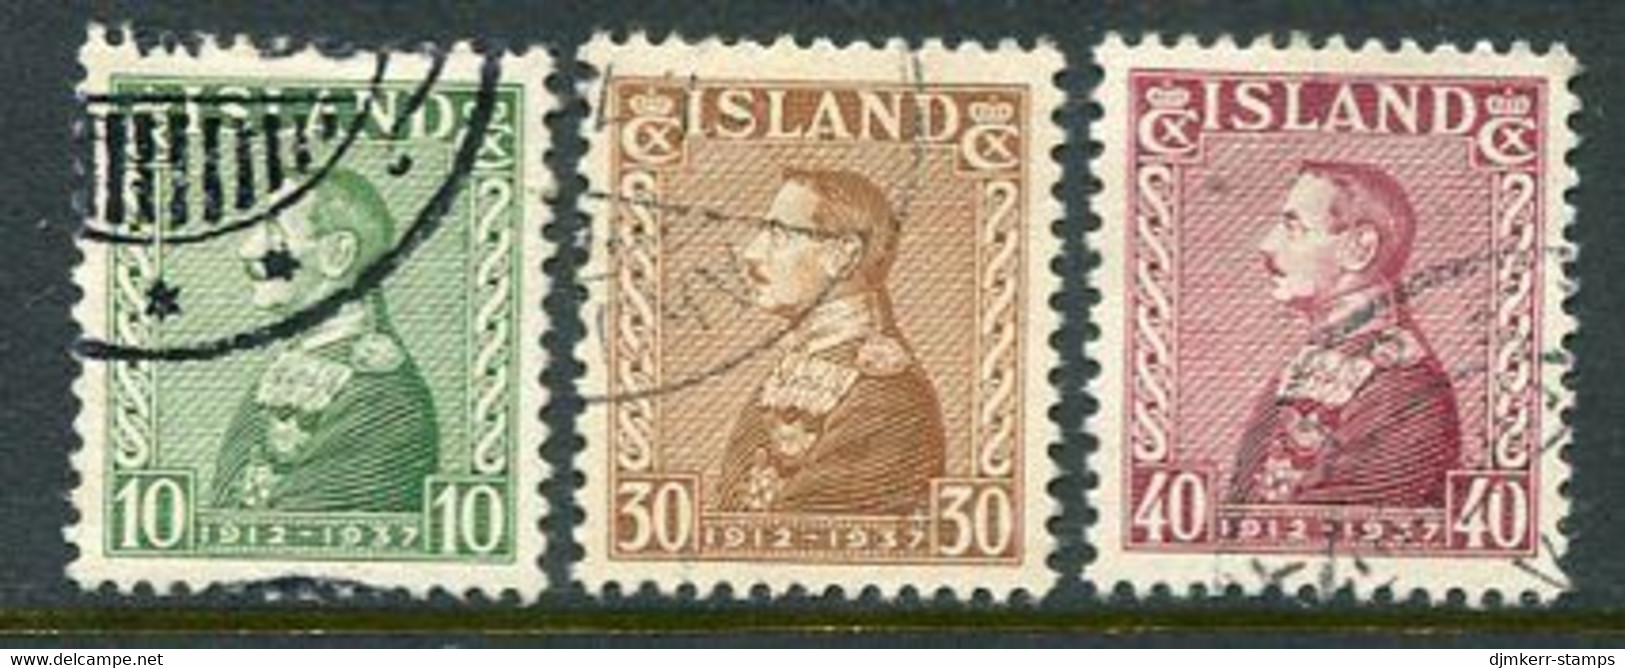 ICELAND  1937 25th Anniversary Of Regency Used.  Michel 187-189 - Used Stamps